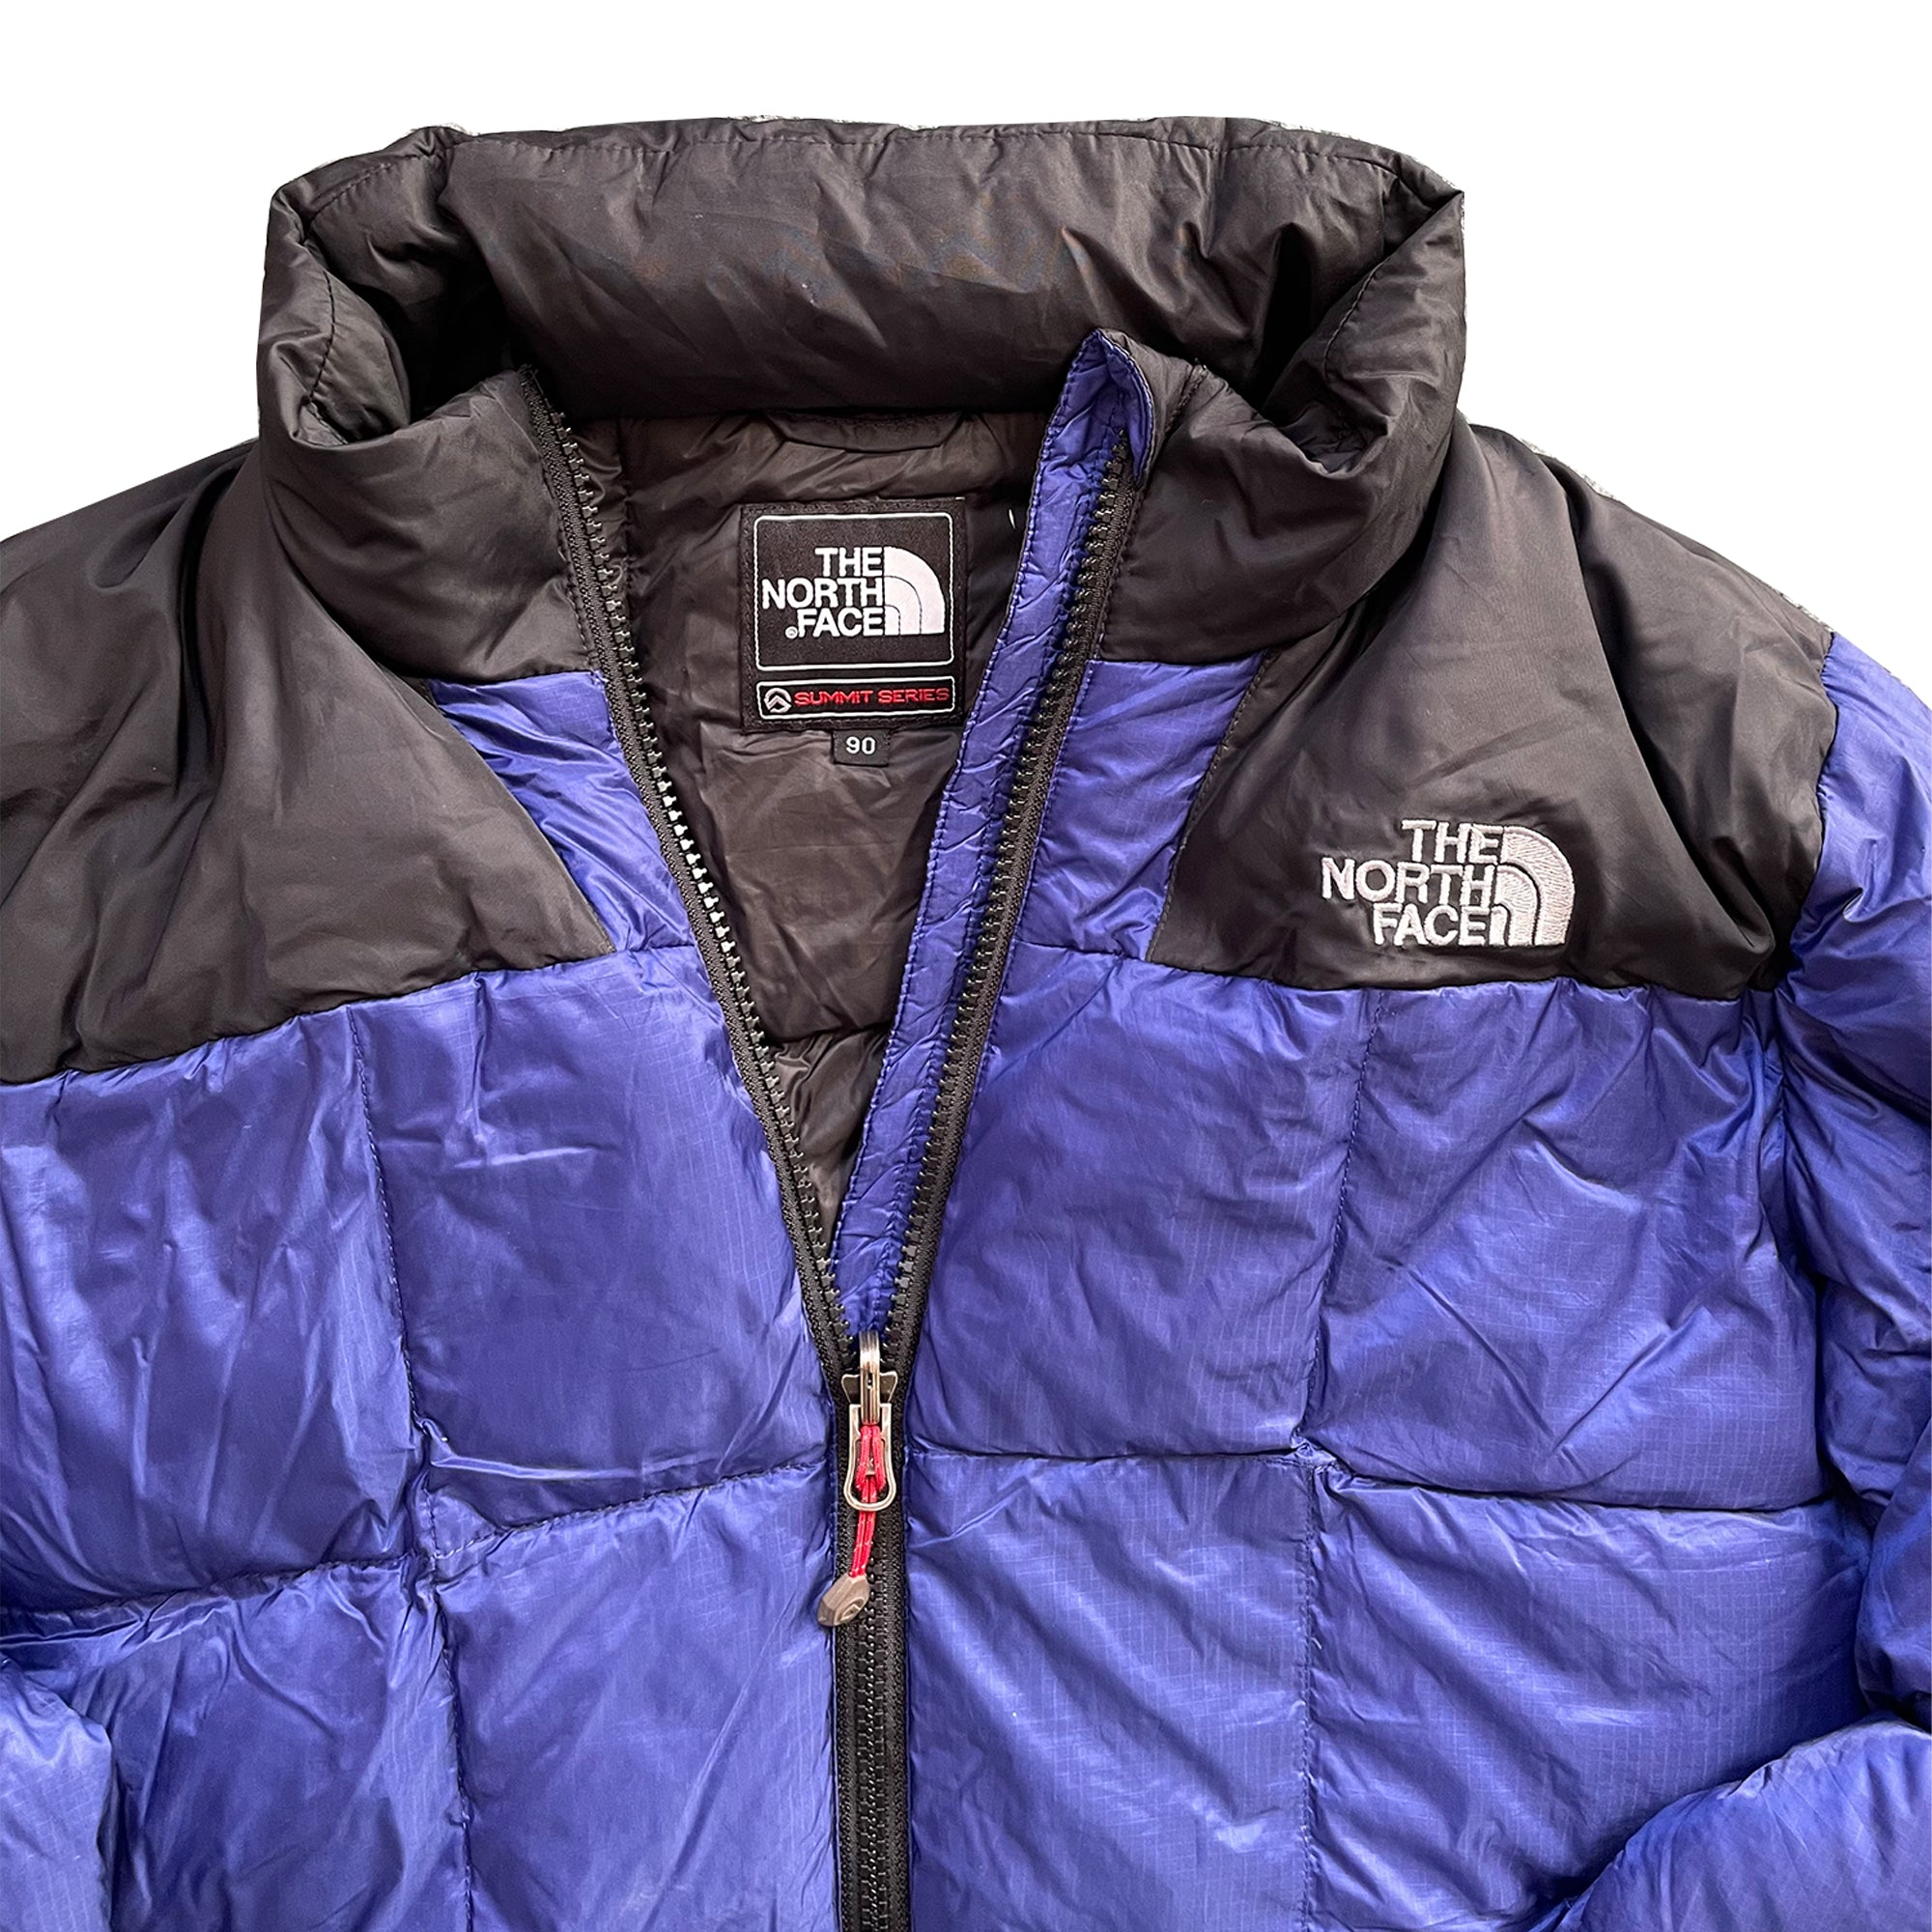 The North Face Summit Series 800 Puffer Jacket - Black/Blue